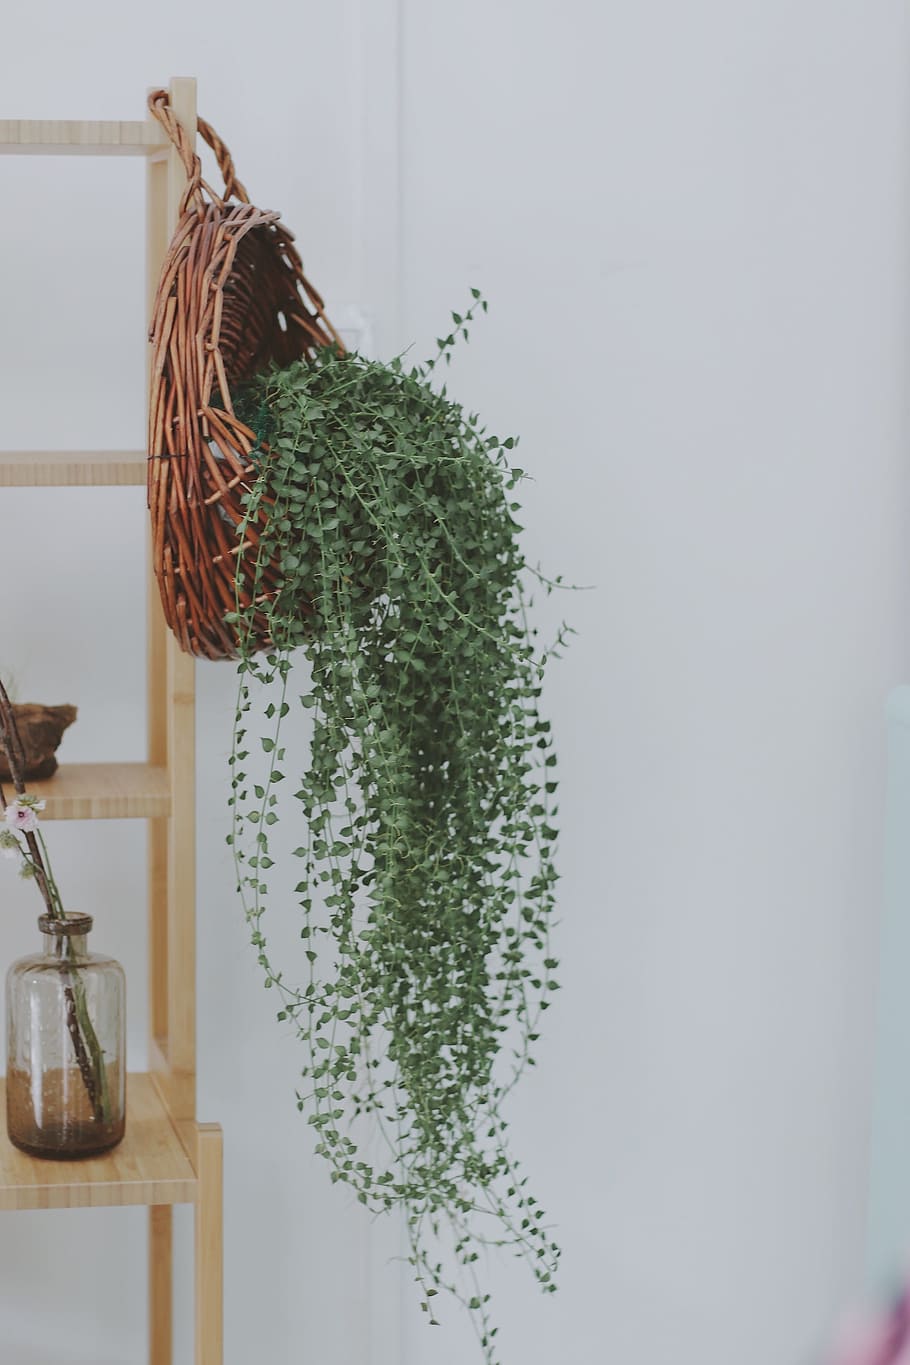 fresh, household, plant, hanging, growth, nature, indoors, decoration, green color, tree